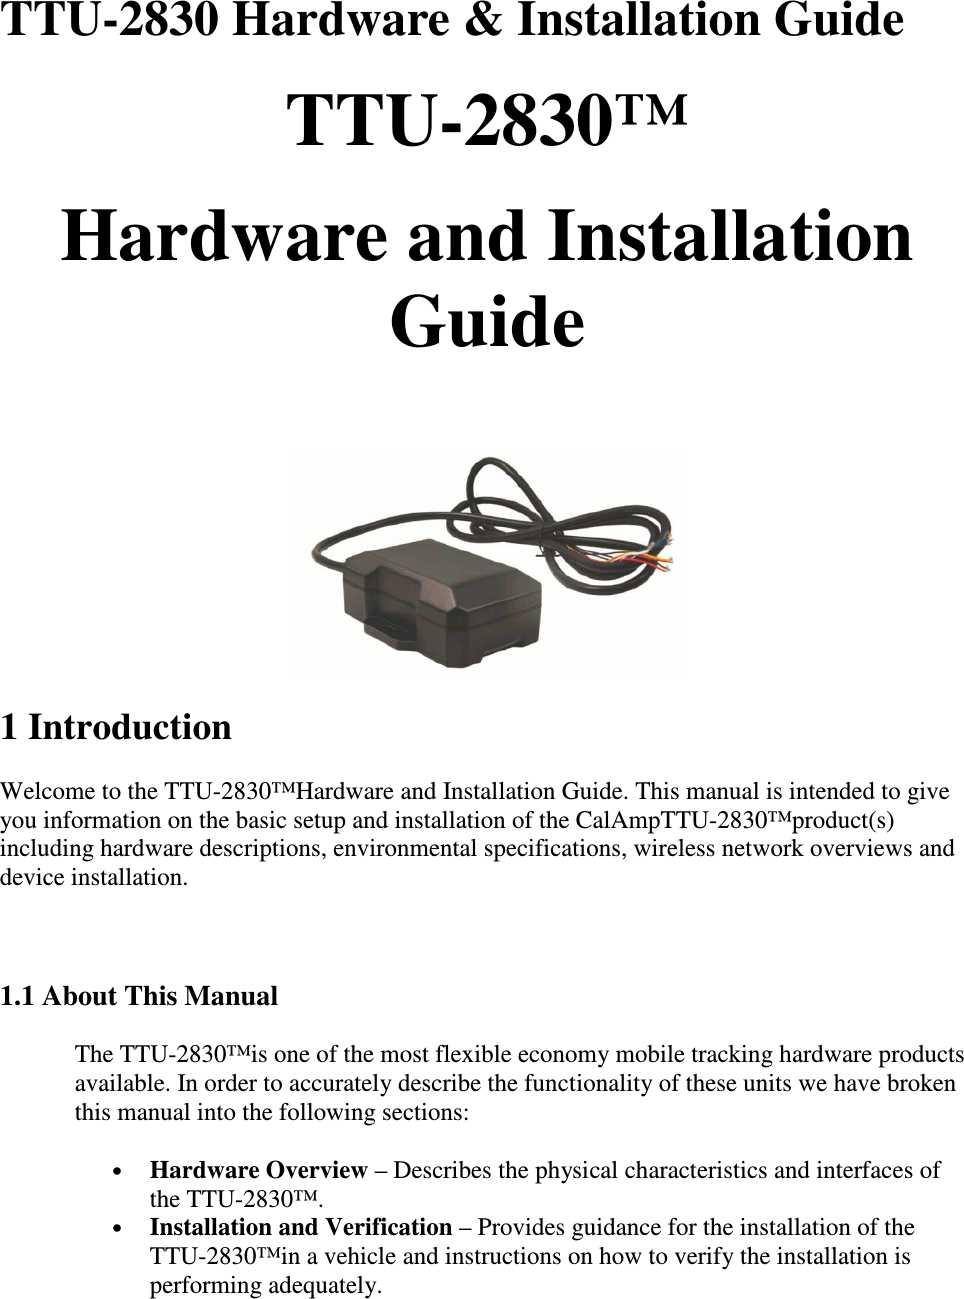 TTU-2830 Hardware &amp; Installation Guide TTU-2830™  Hardware and Installation Guide    1 Introduction Welcome to the TTU-2830™Hardware and Installation Guide. This manual is intended to give you information on the basic setup and installation of the CalAmpTTU-2830™product(s) including hardware descriptions, environmental specifications, wireless network overviews and device installation.   1.1 About This Manual  The TTU-2830™is one of the most flexible economy mobile tracking hardware products available. In order to accurately describe the functionality of these units we have broken this manual into the following sections:  • Hardware Overview – Describes the physical characteristics and interfaces of the TTU-2830™.  • Installation and Verification – Provides guidance for the installation of the TTU-2830™in a vehicle and instructions on how to verify the installation is performing adequately.  